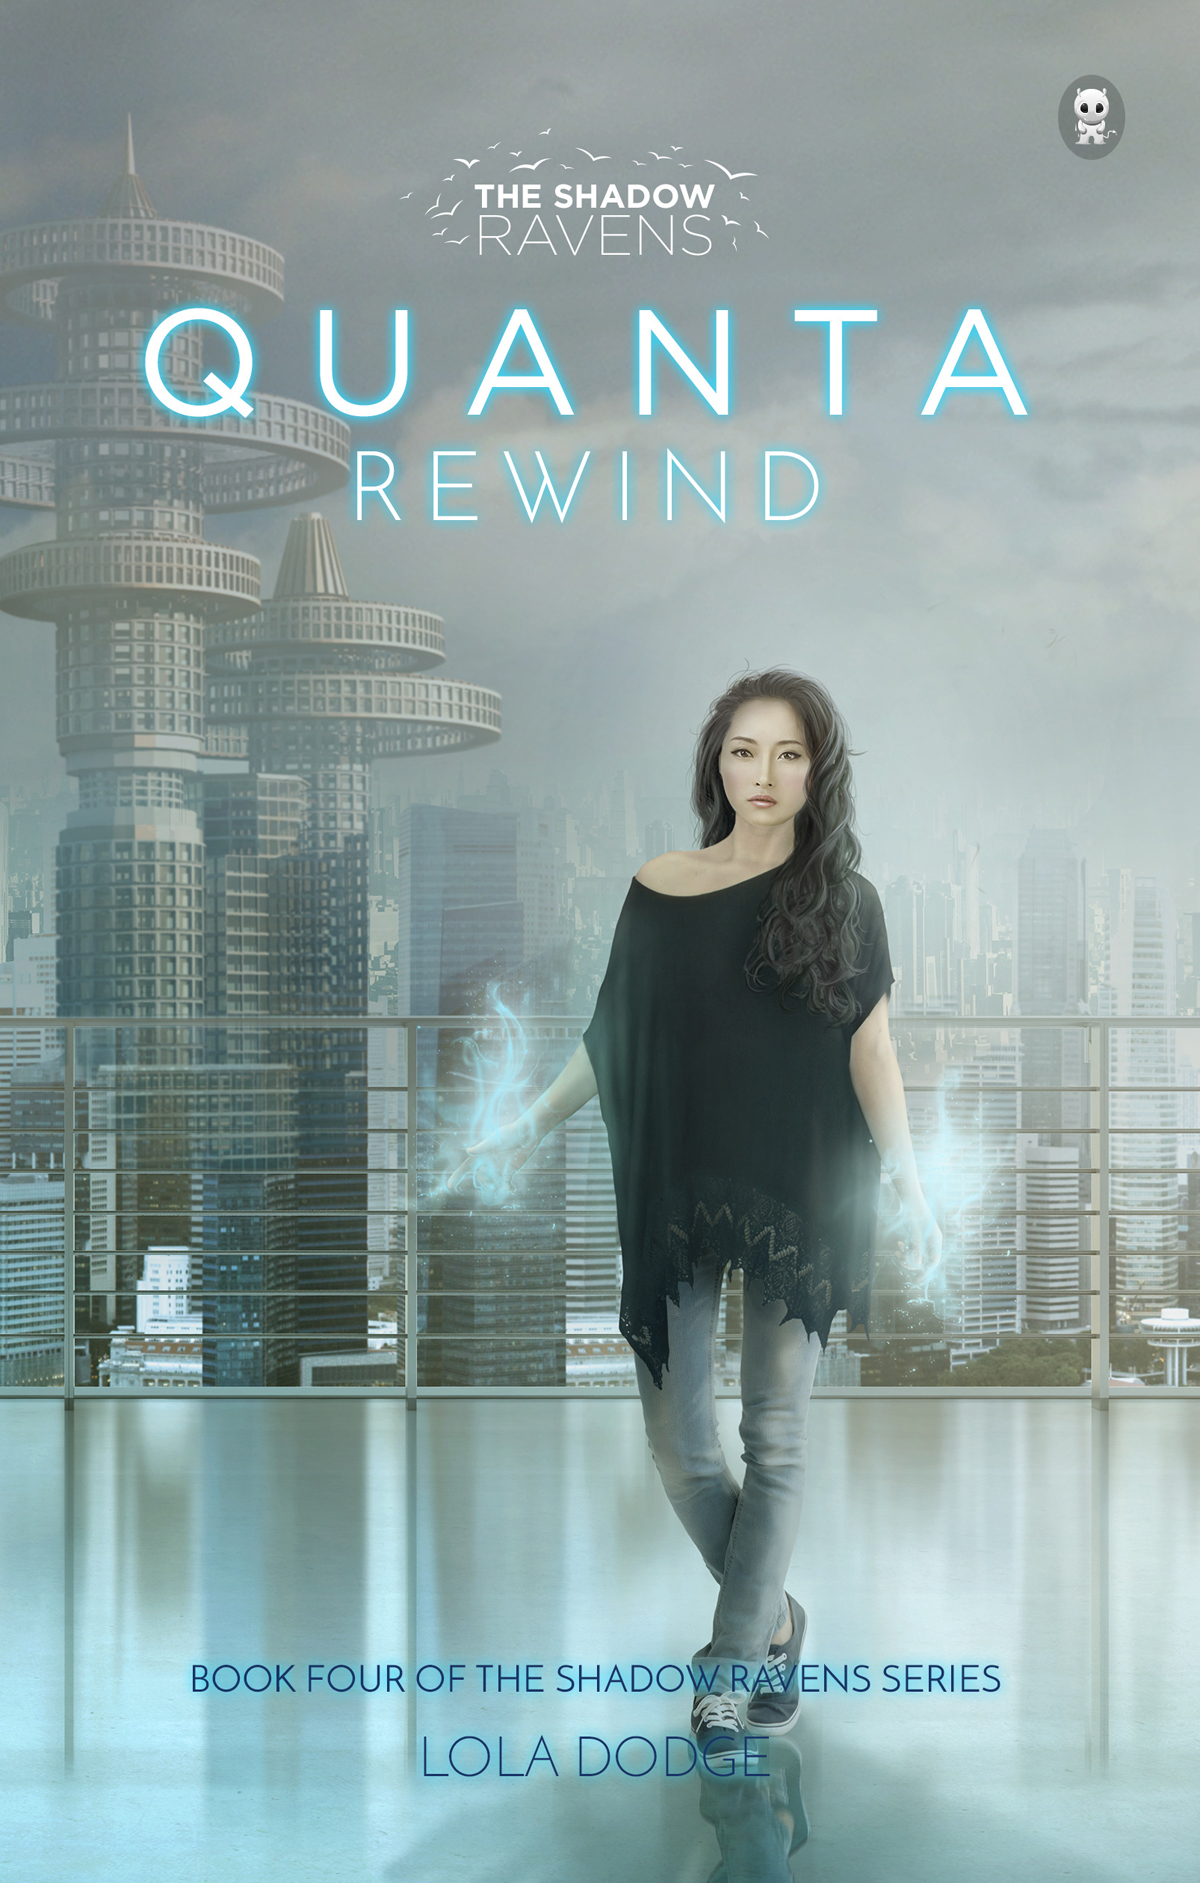 This image is the cover for the book Quanta Rewind, The Shadow Ravens